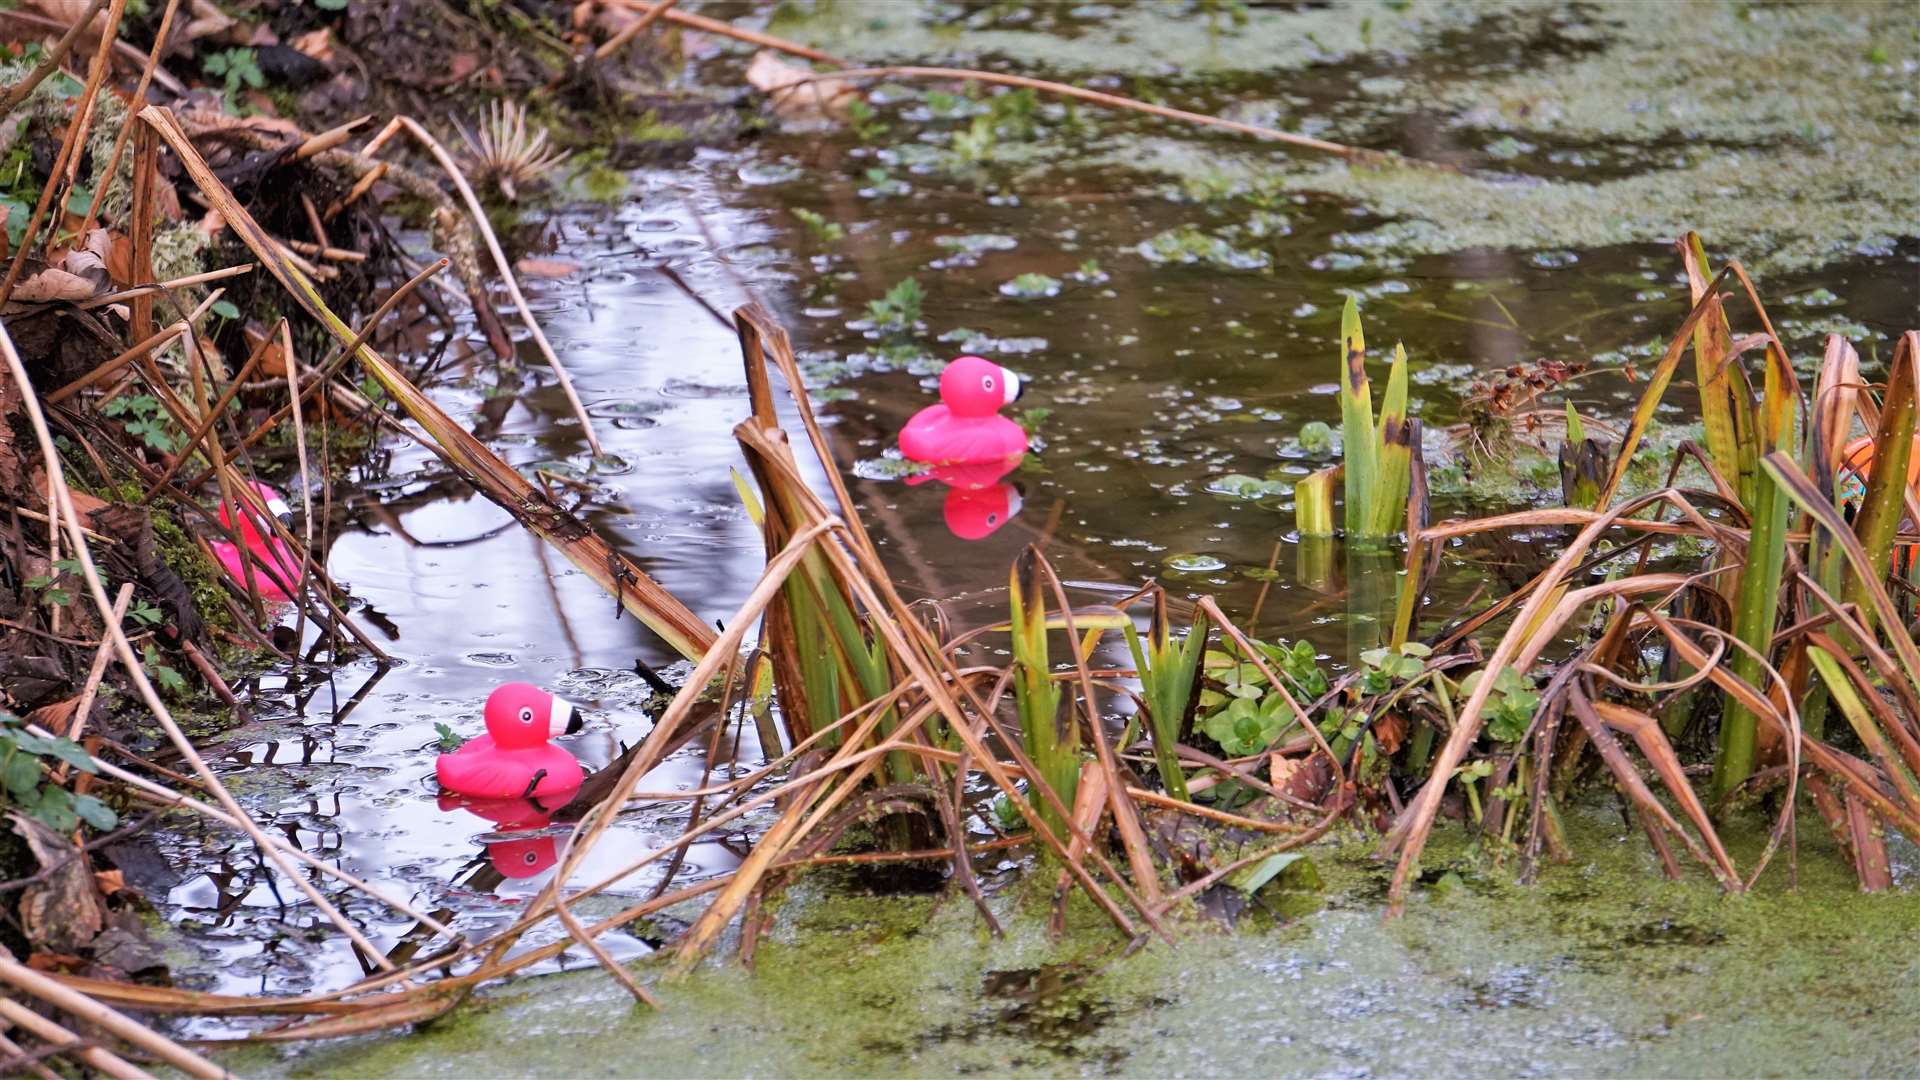 A special game for children with plastic ducks on the pond. Picture: DGS